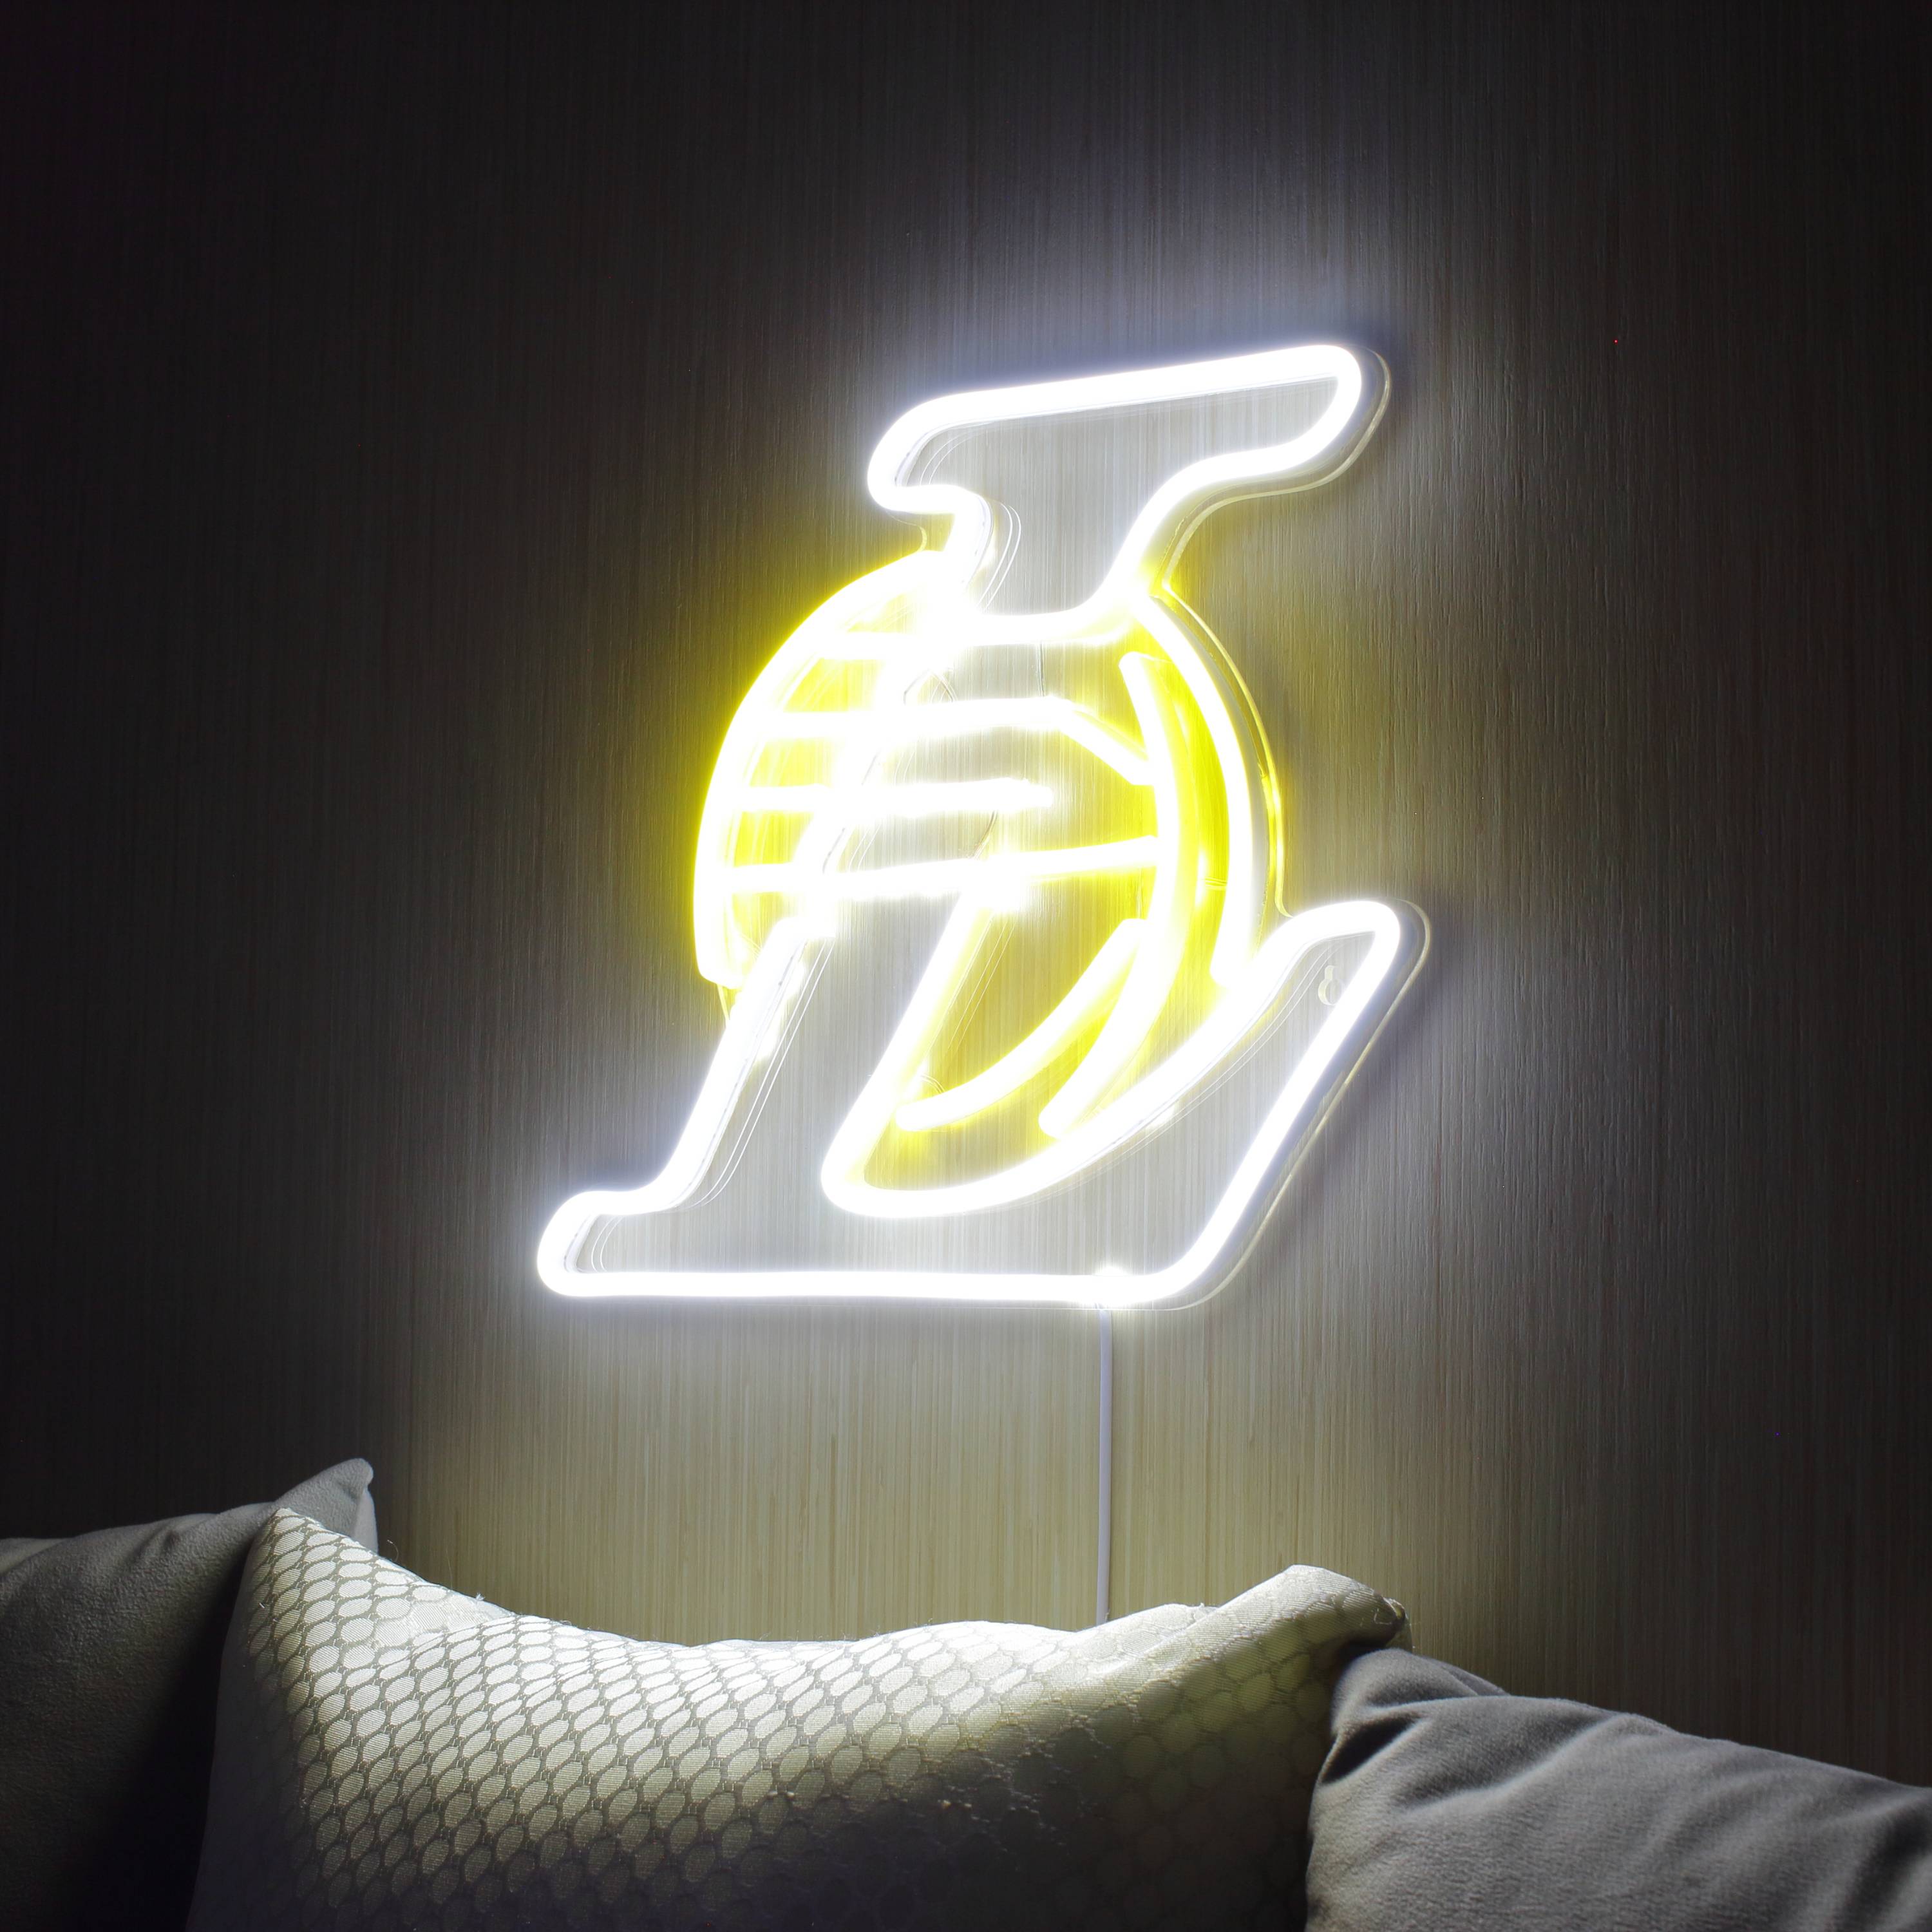 NBA Los Angeles Lakers LED Neon Sign